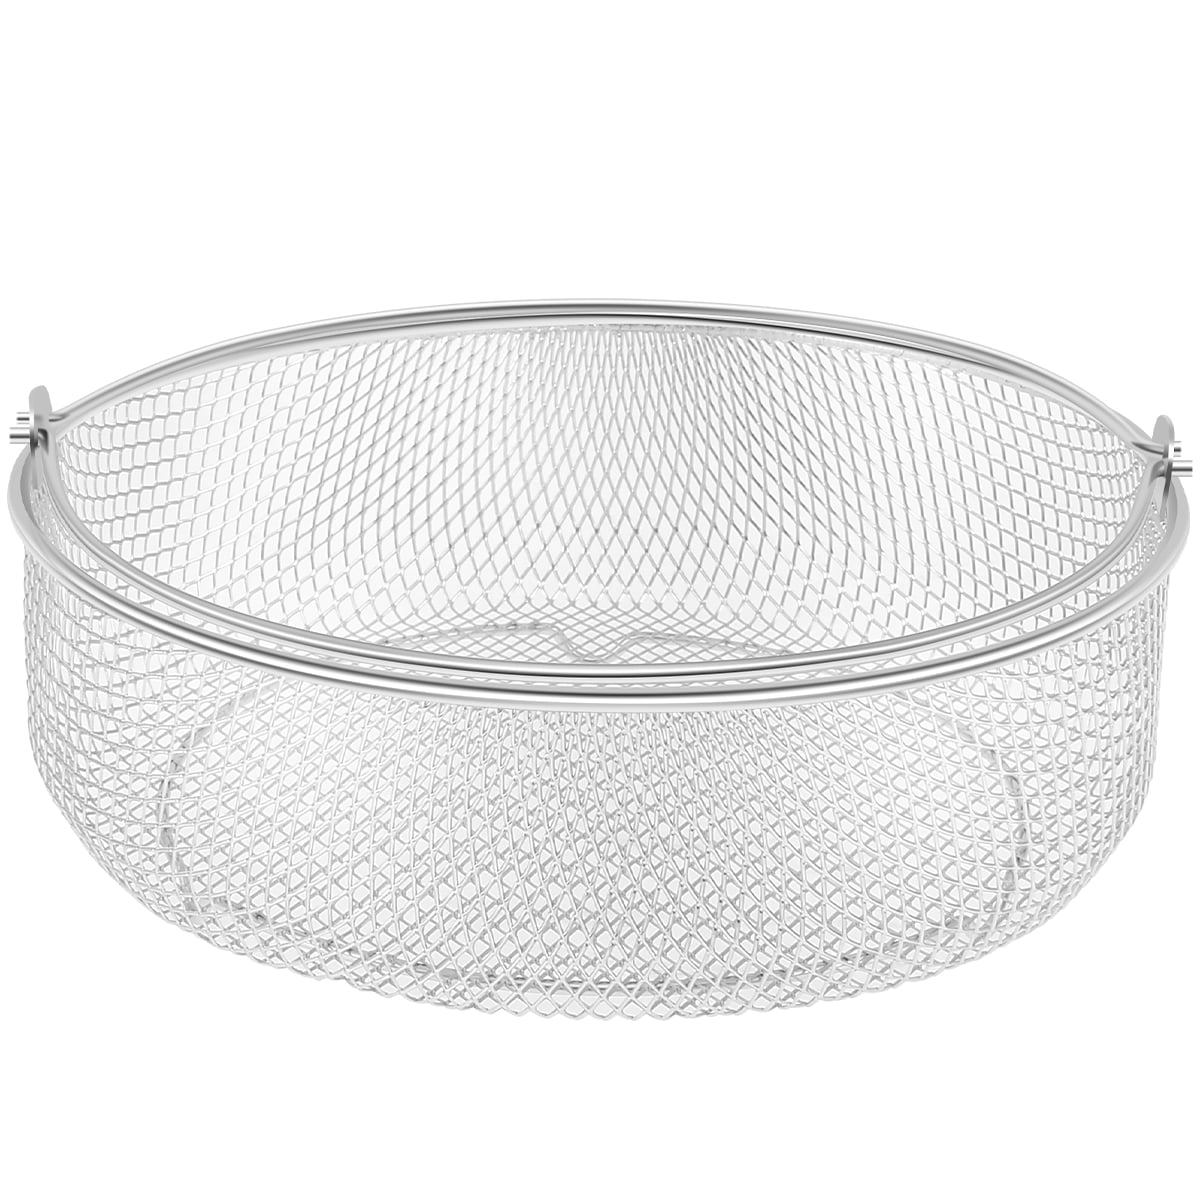 Mlfire Air Fryer Basket Steamer Basket 8.26 inch Stainless Steel Mesh Basket with Handle for Air Fryer Replacement Accessory Instant Pot, Oven